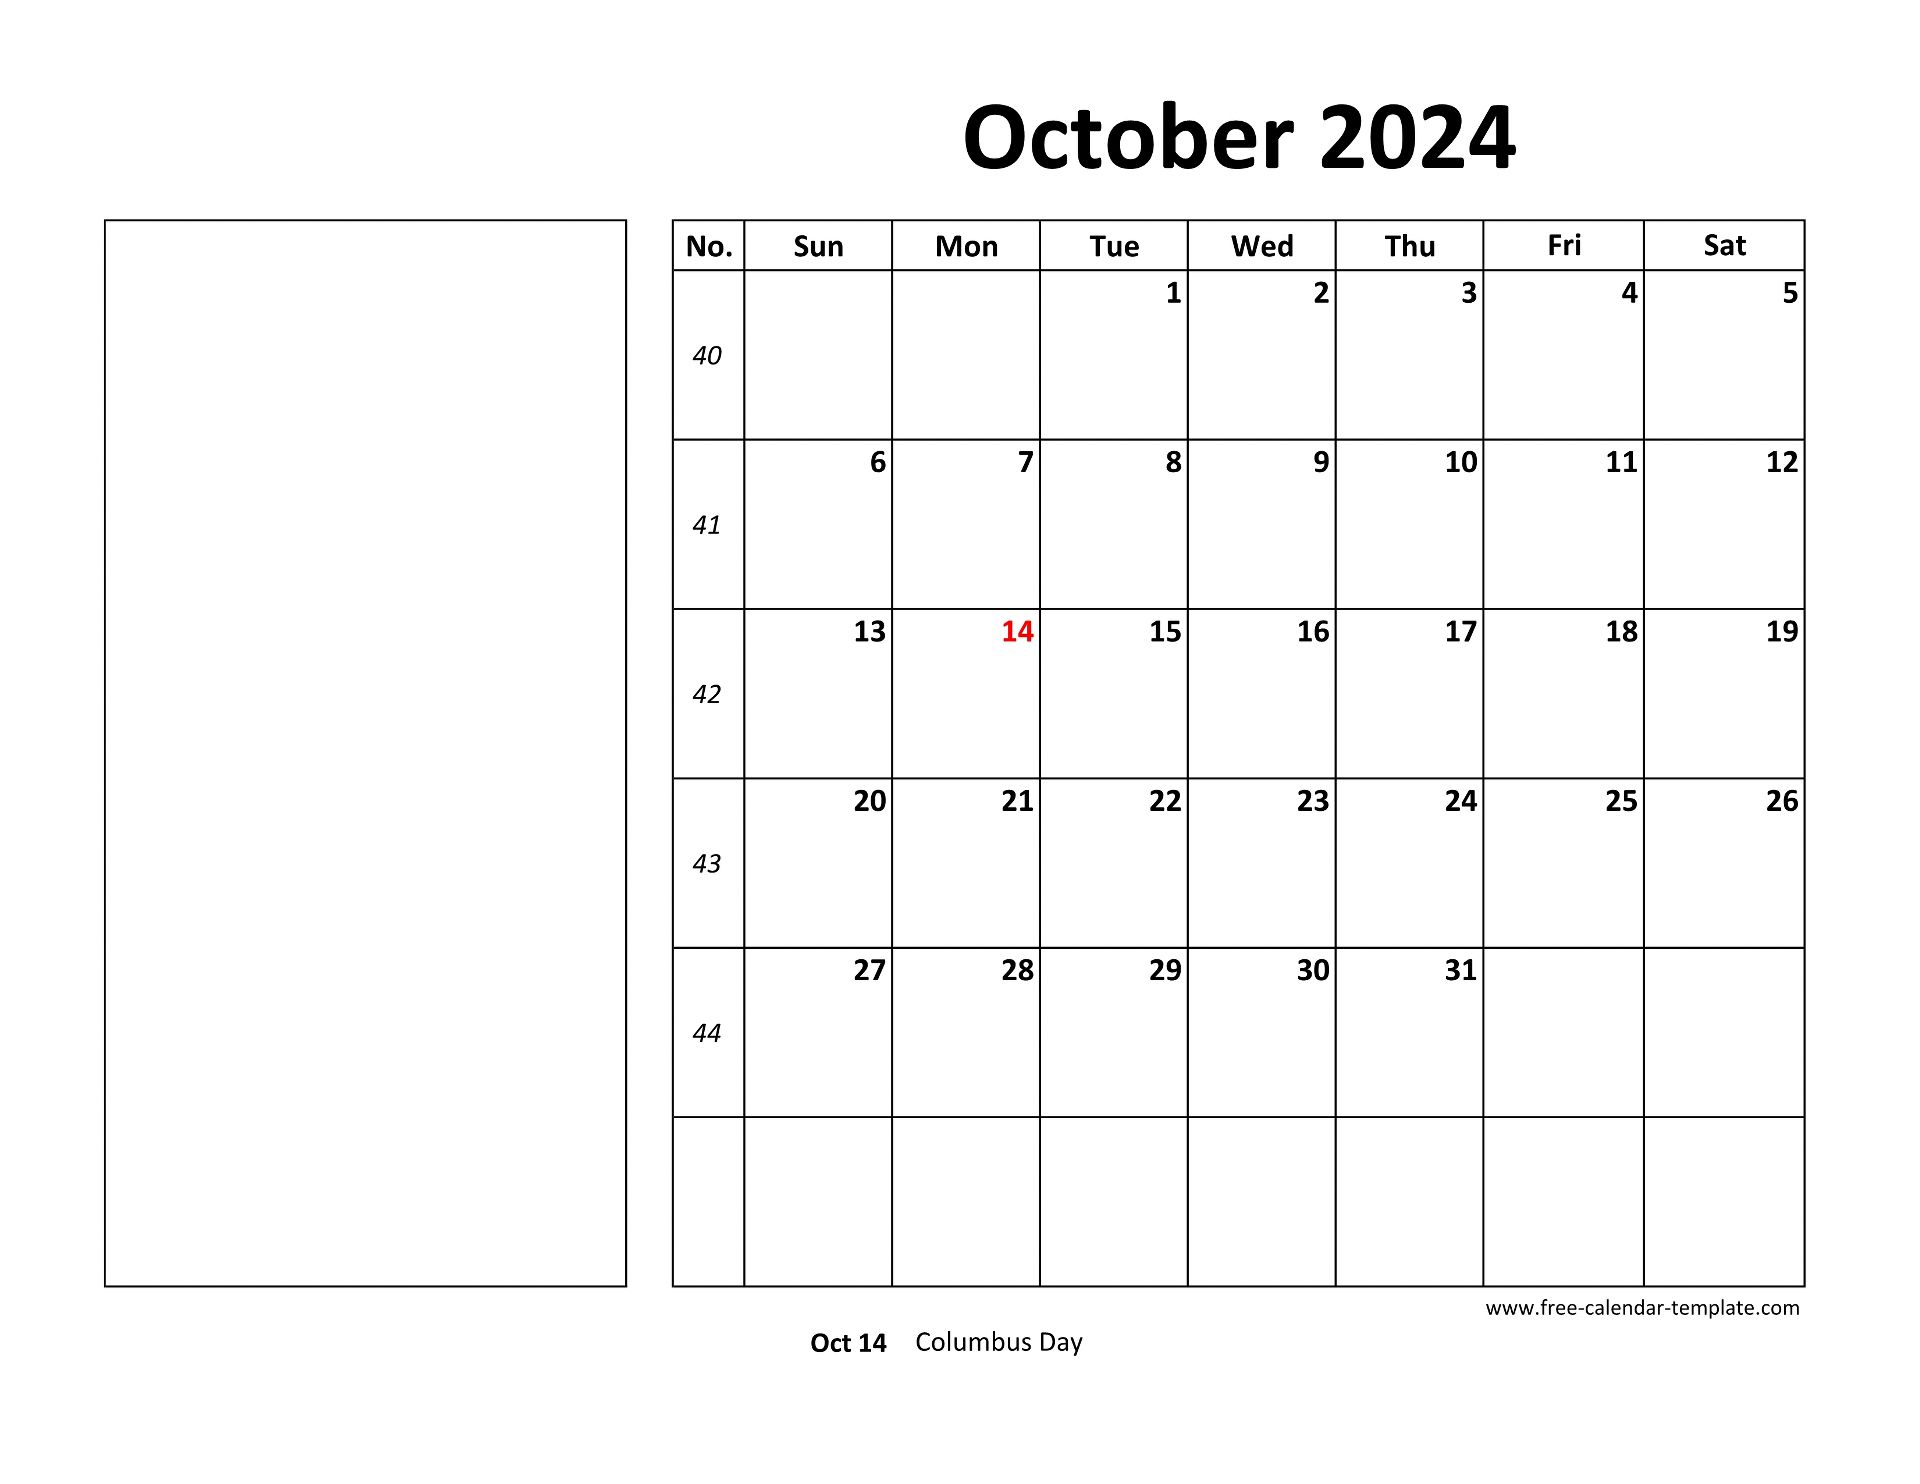 printable-october-2024-calendar-box-and-lines-for-notes-free-calendar-template